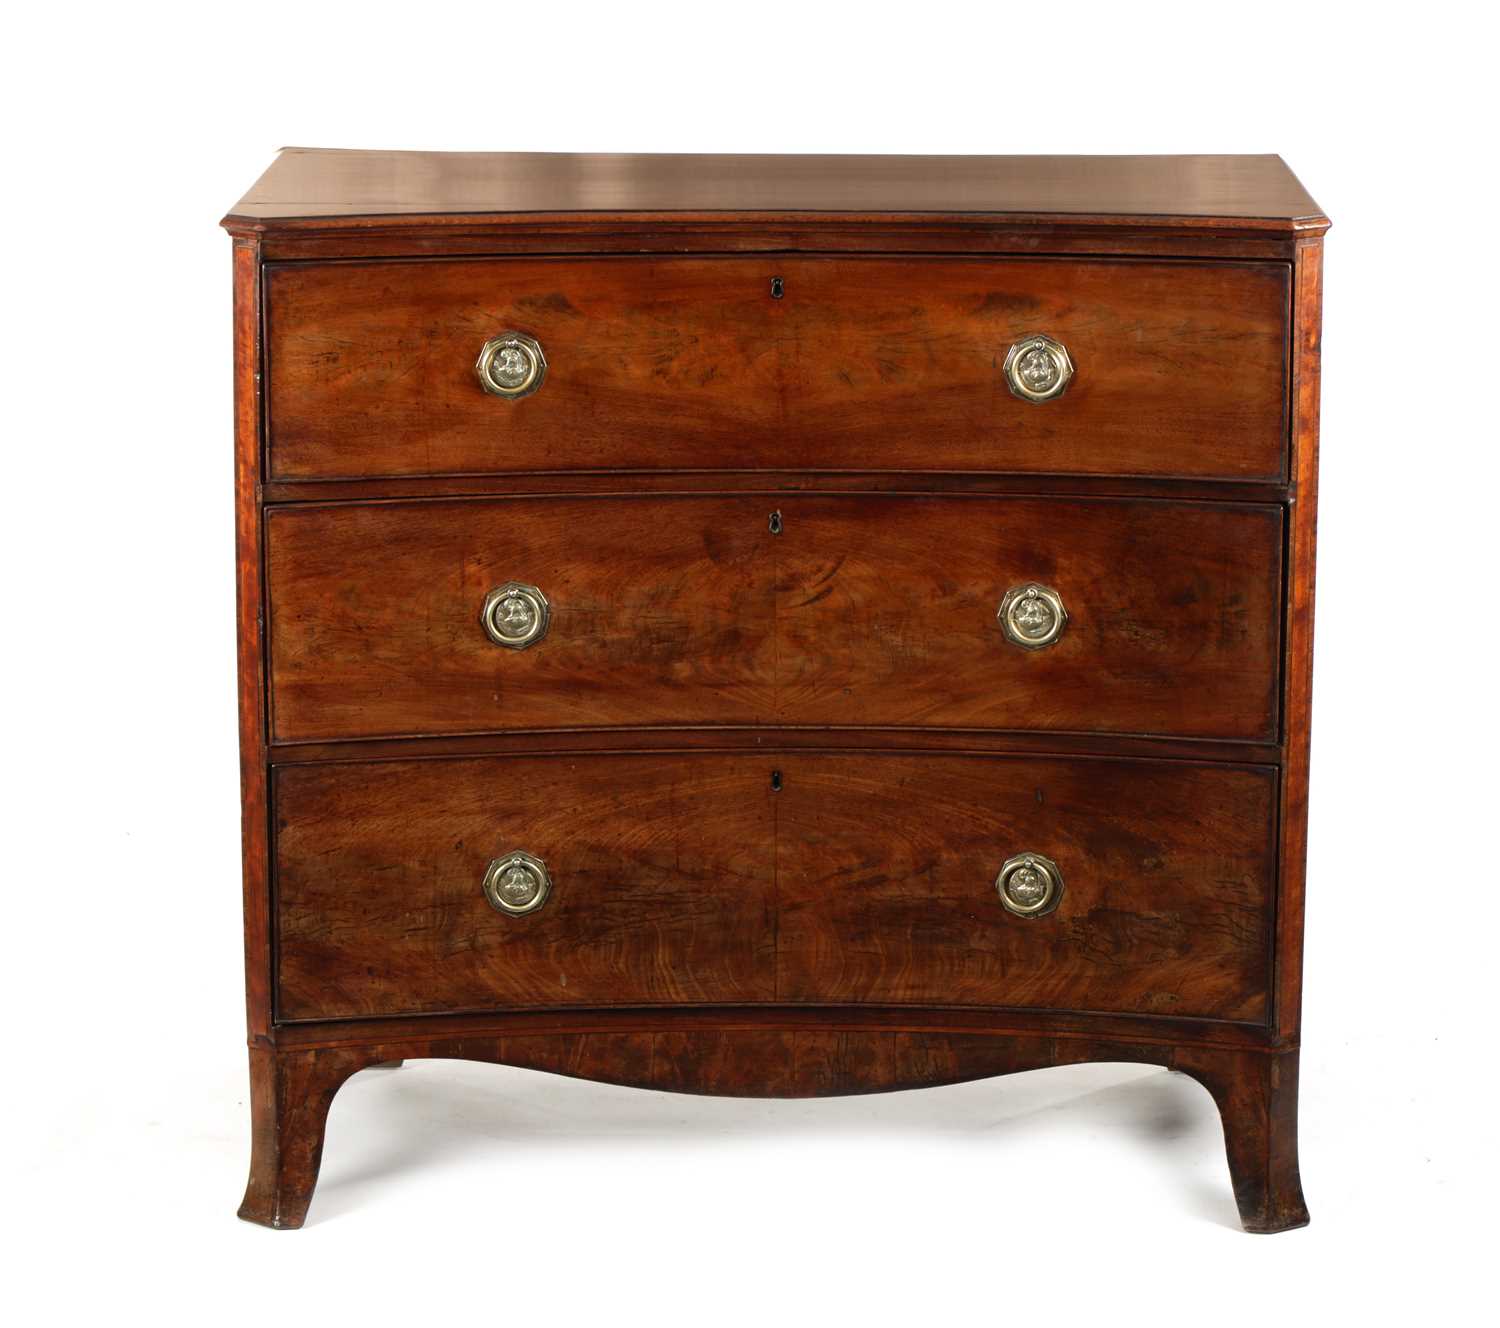 Lot 1422 - AN UNUSUAL LATE GEORGIAN FIGURED MAHOGANY INVERTED BOW FRONT CHEST OF DRAWERS